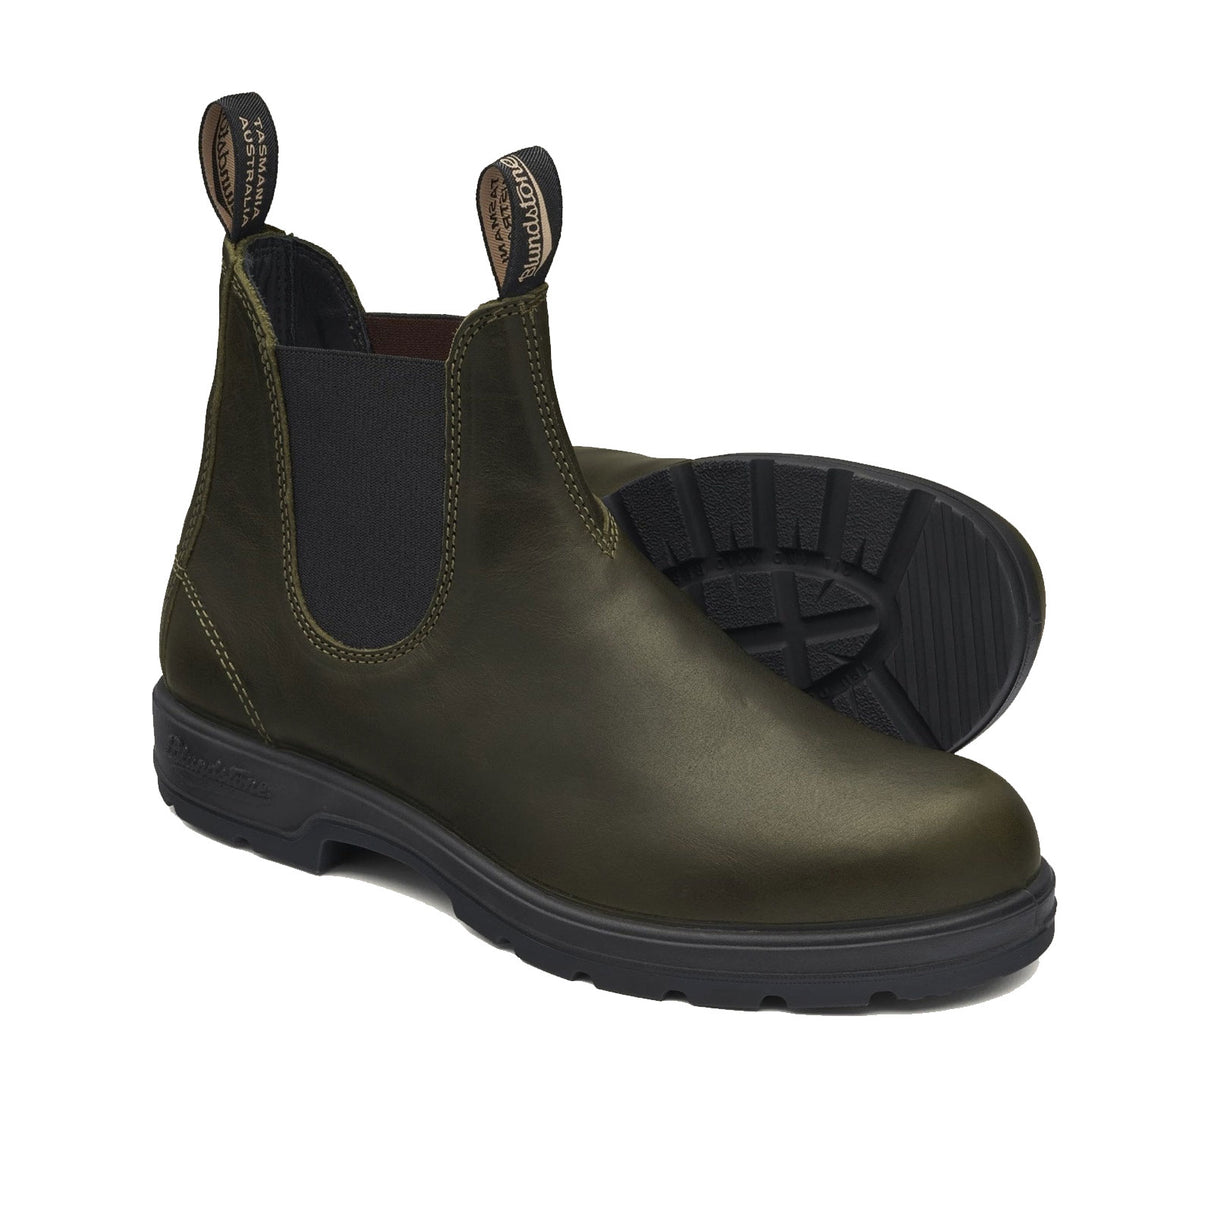 Blundstone Classic 550 Chelsea Boot (Unisex) - Green Boots - Fashion - Chelsea - The Heel Shoe Fitters